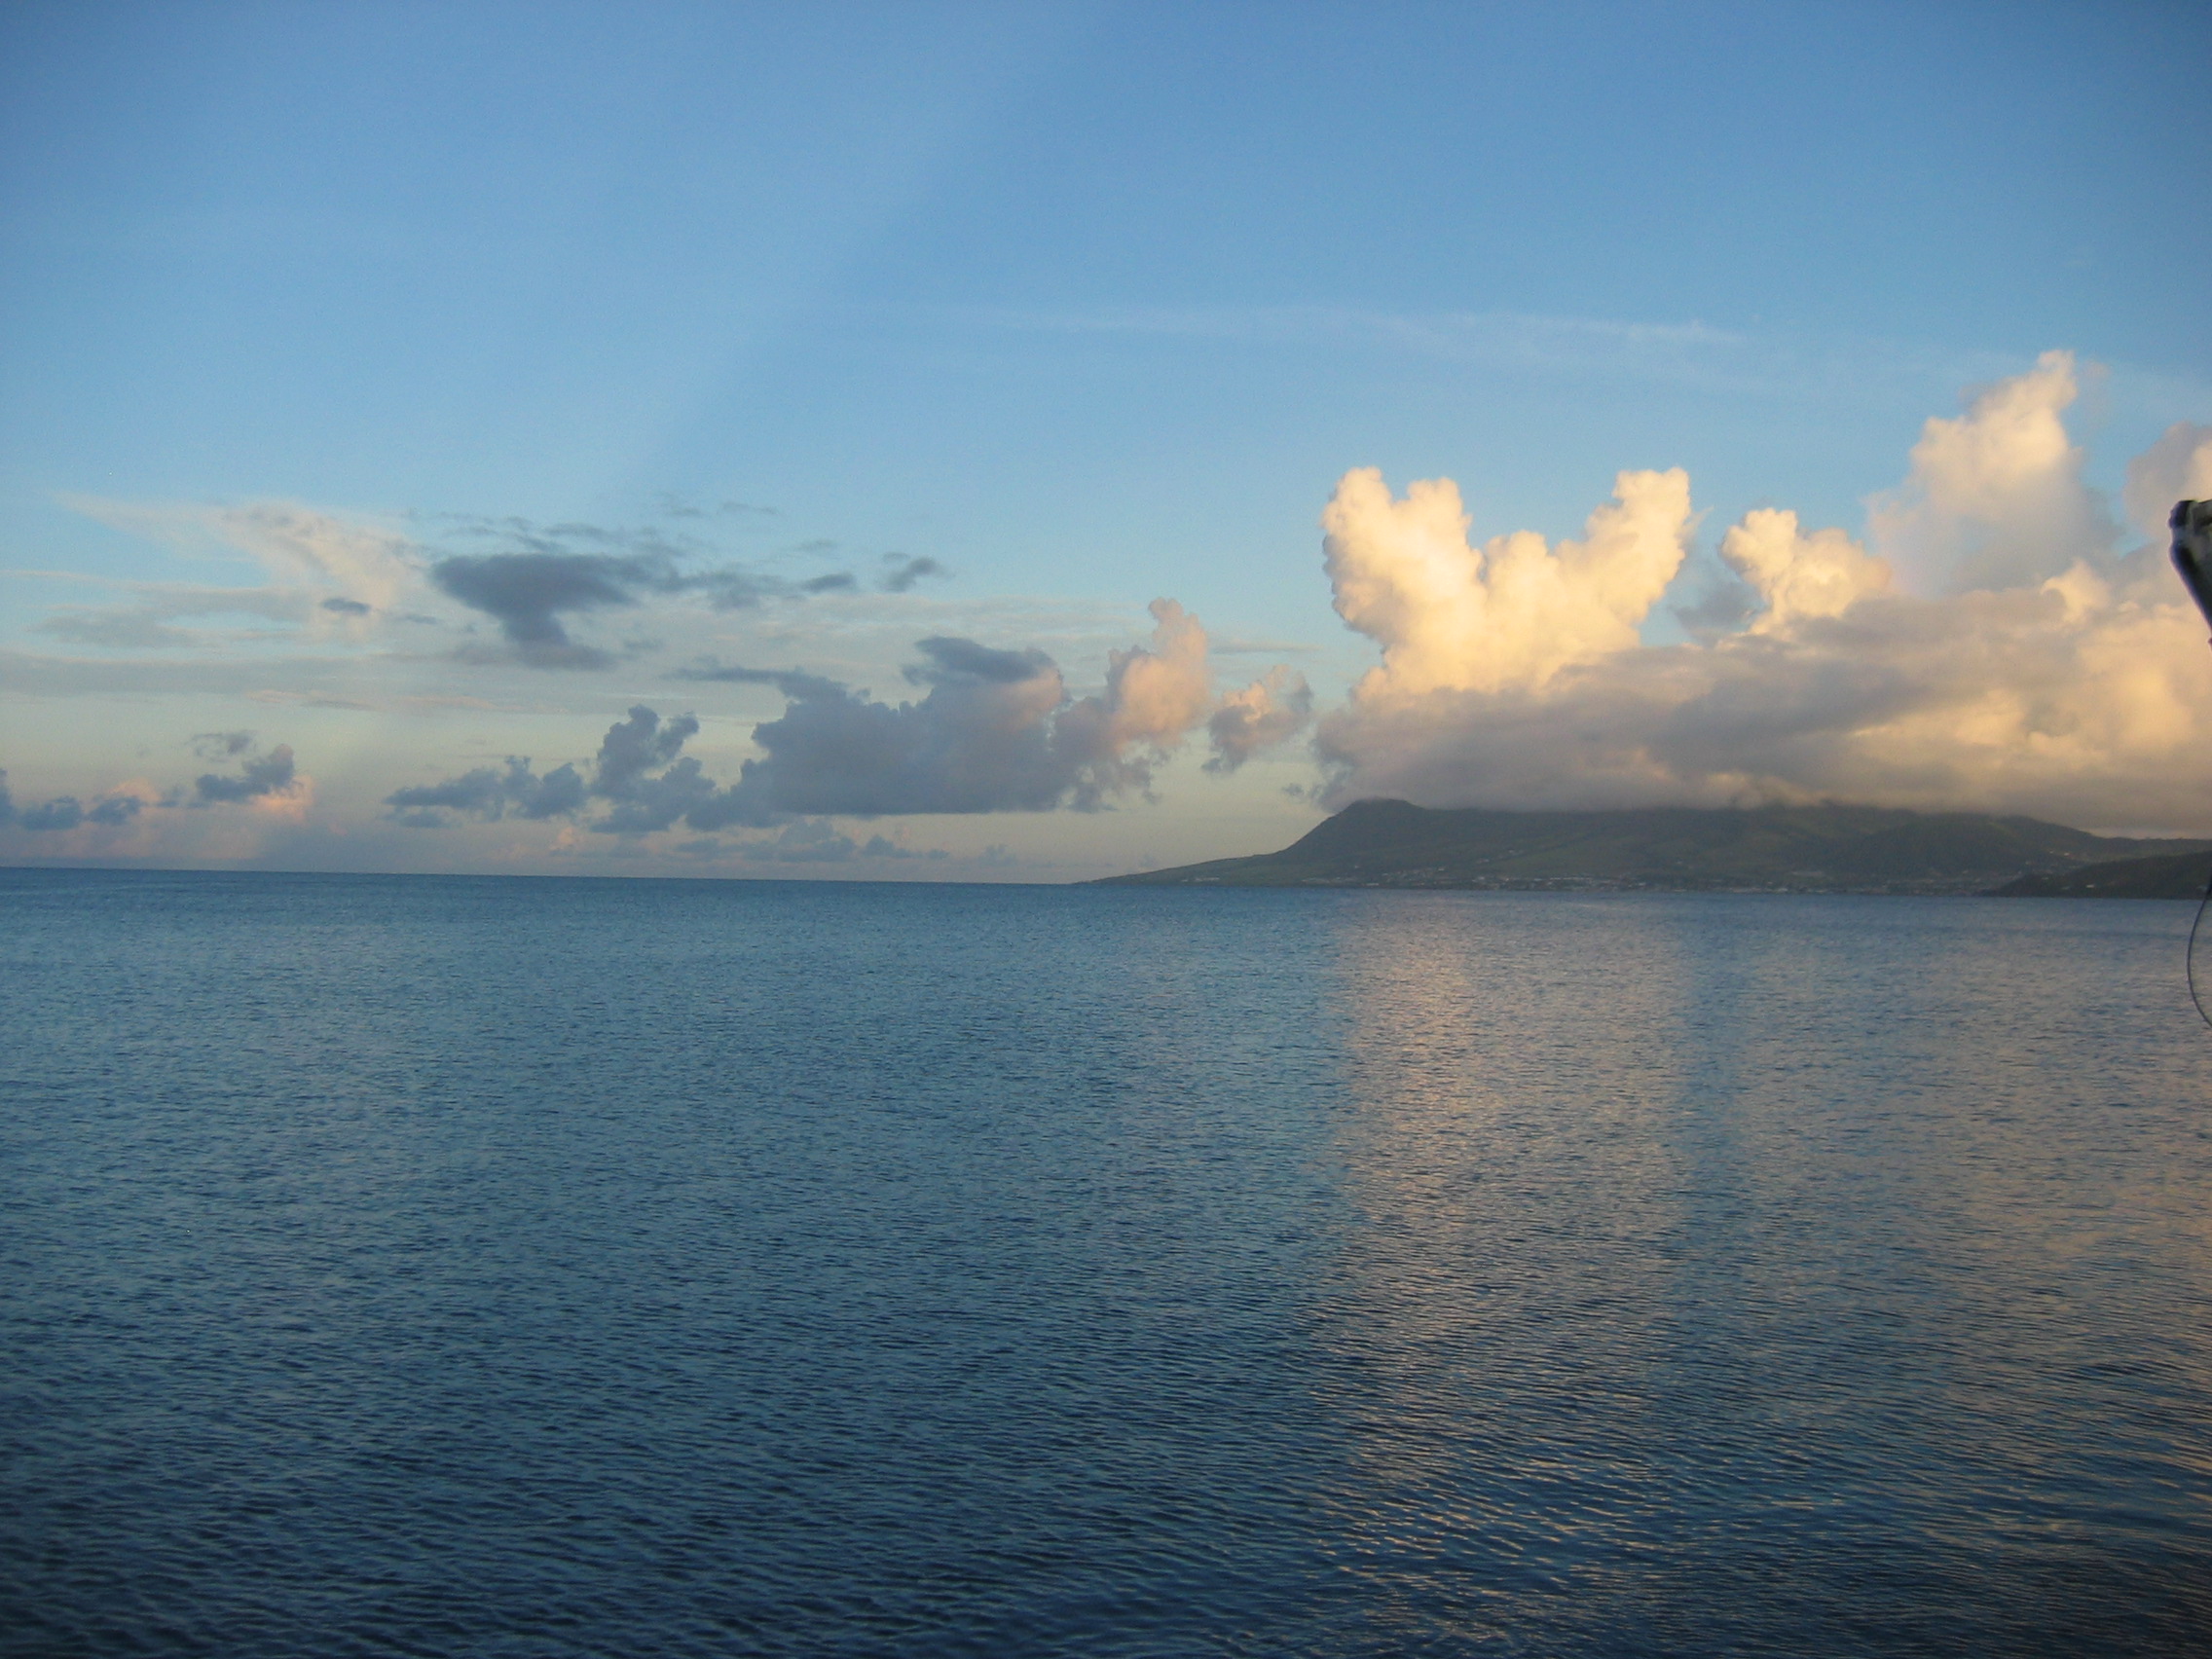 Morning view of St Kitts